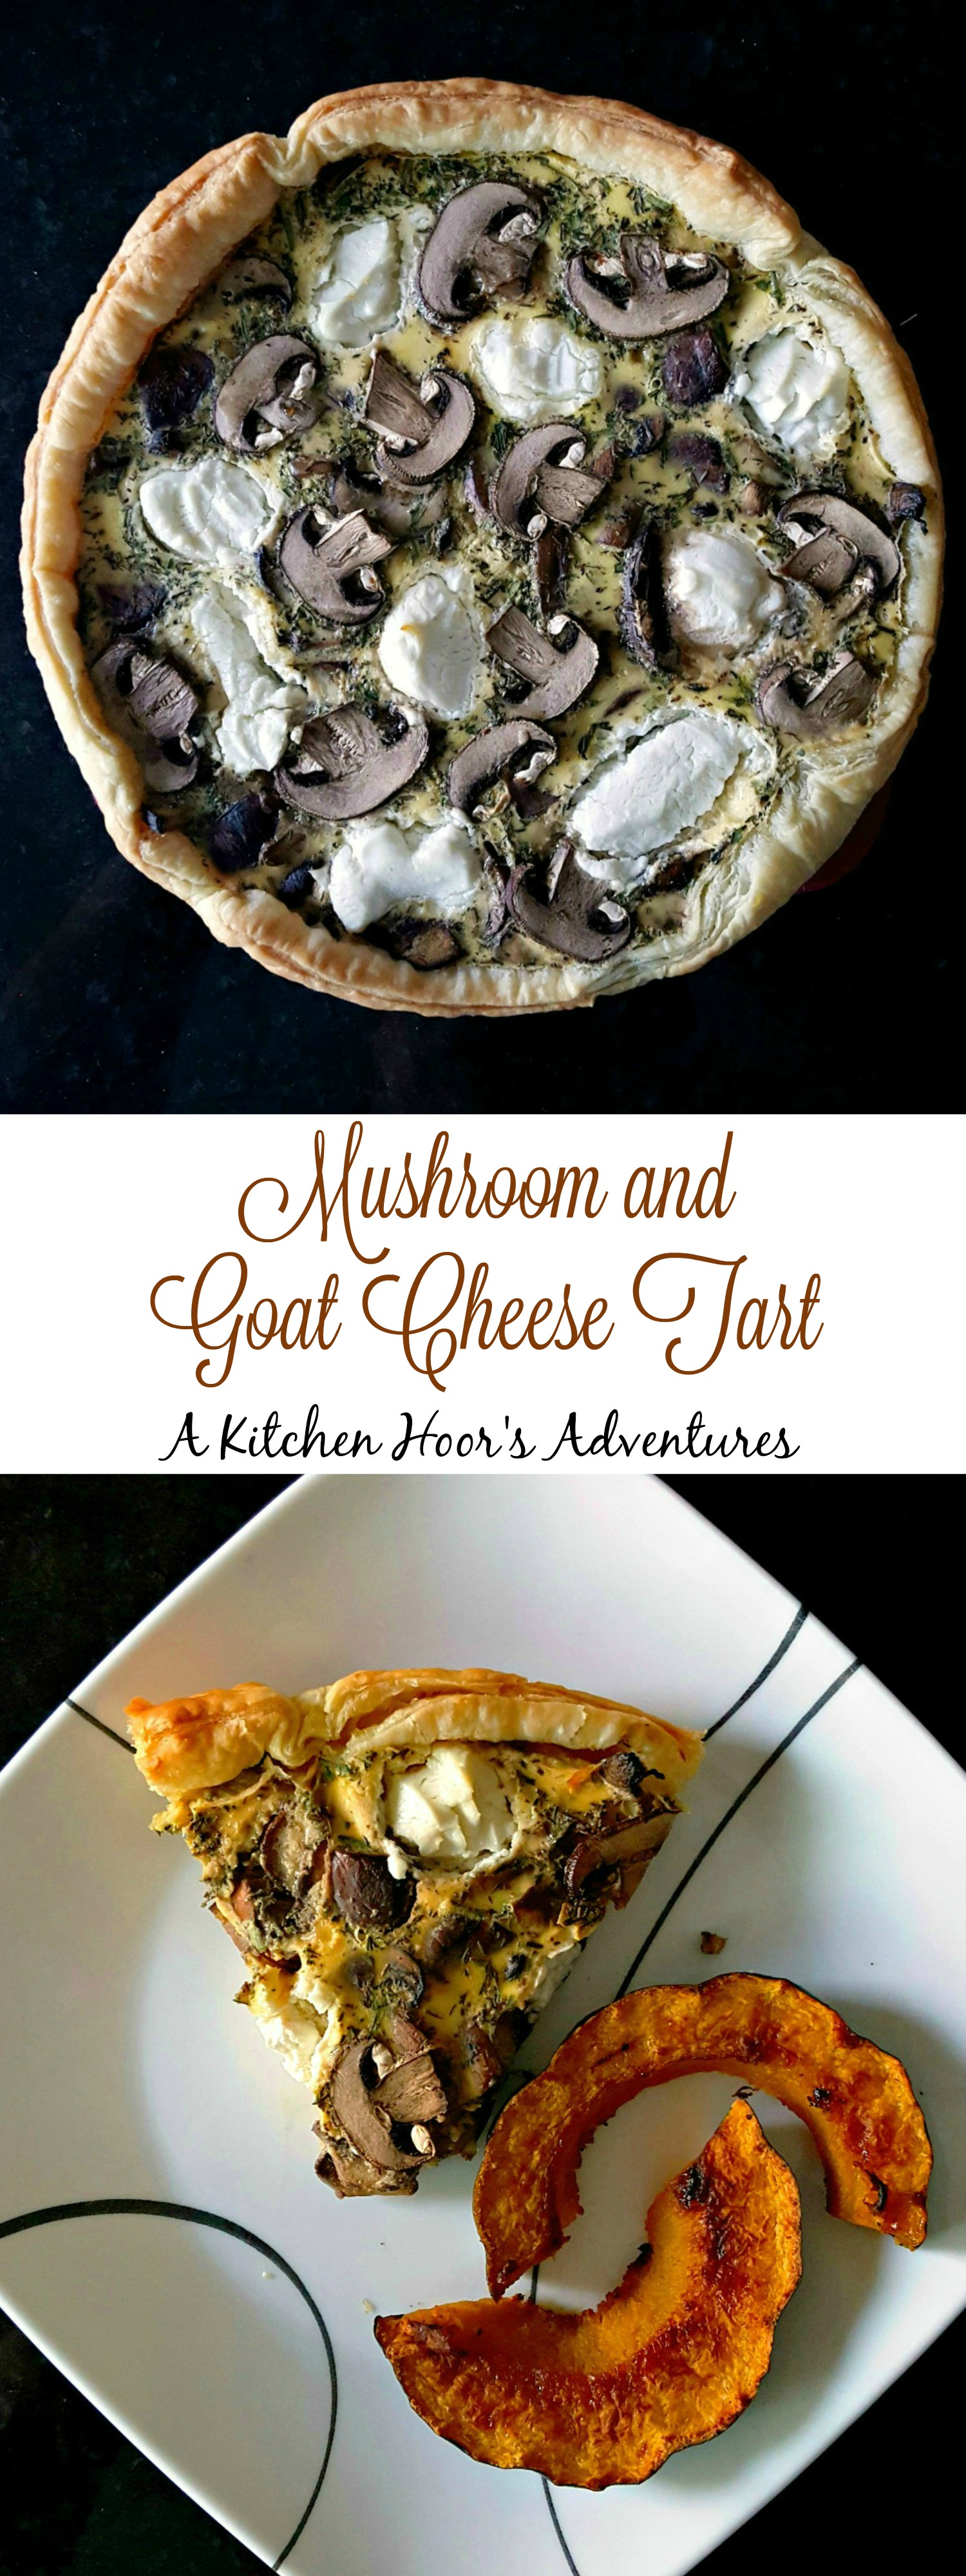 Earthy mushrooms pair perfectly with puff pastry and goat cheese in this #meatfree, <strong>Mushroom and Goat Cheese Tart</strong>. Prep the vegetables the day before to make this a simple and easy brunch or #MeatlessMonday meal.